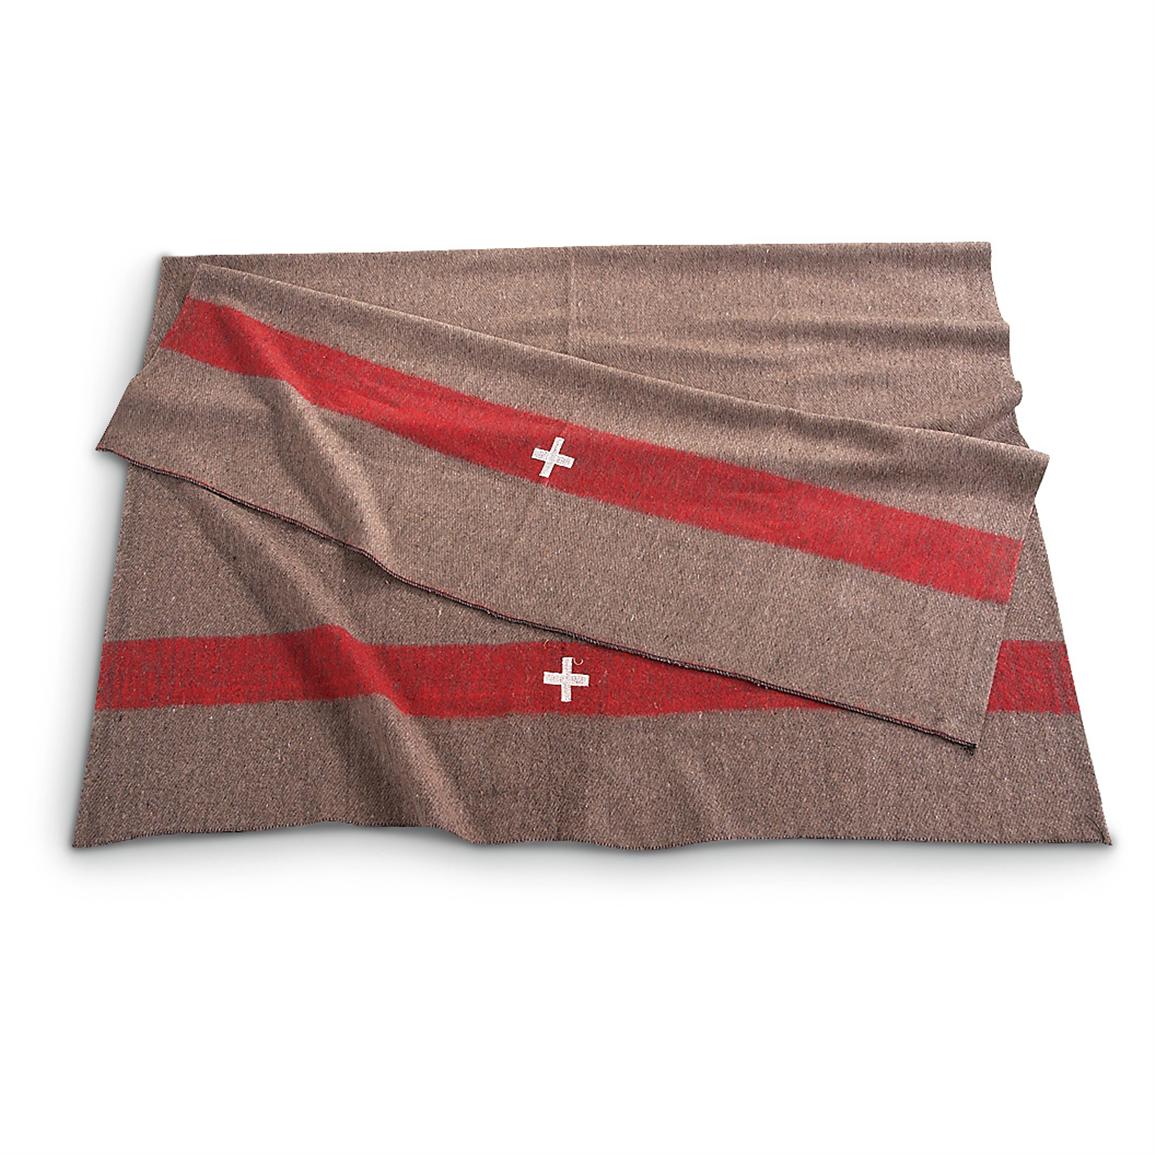 Swiss Army Style Wool Blanket, Reproduction - 232159, Army